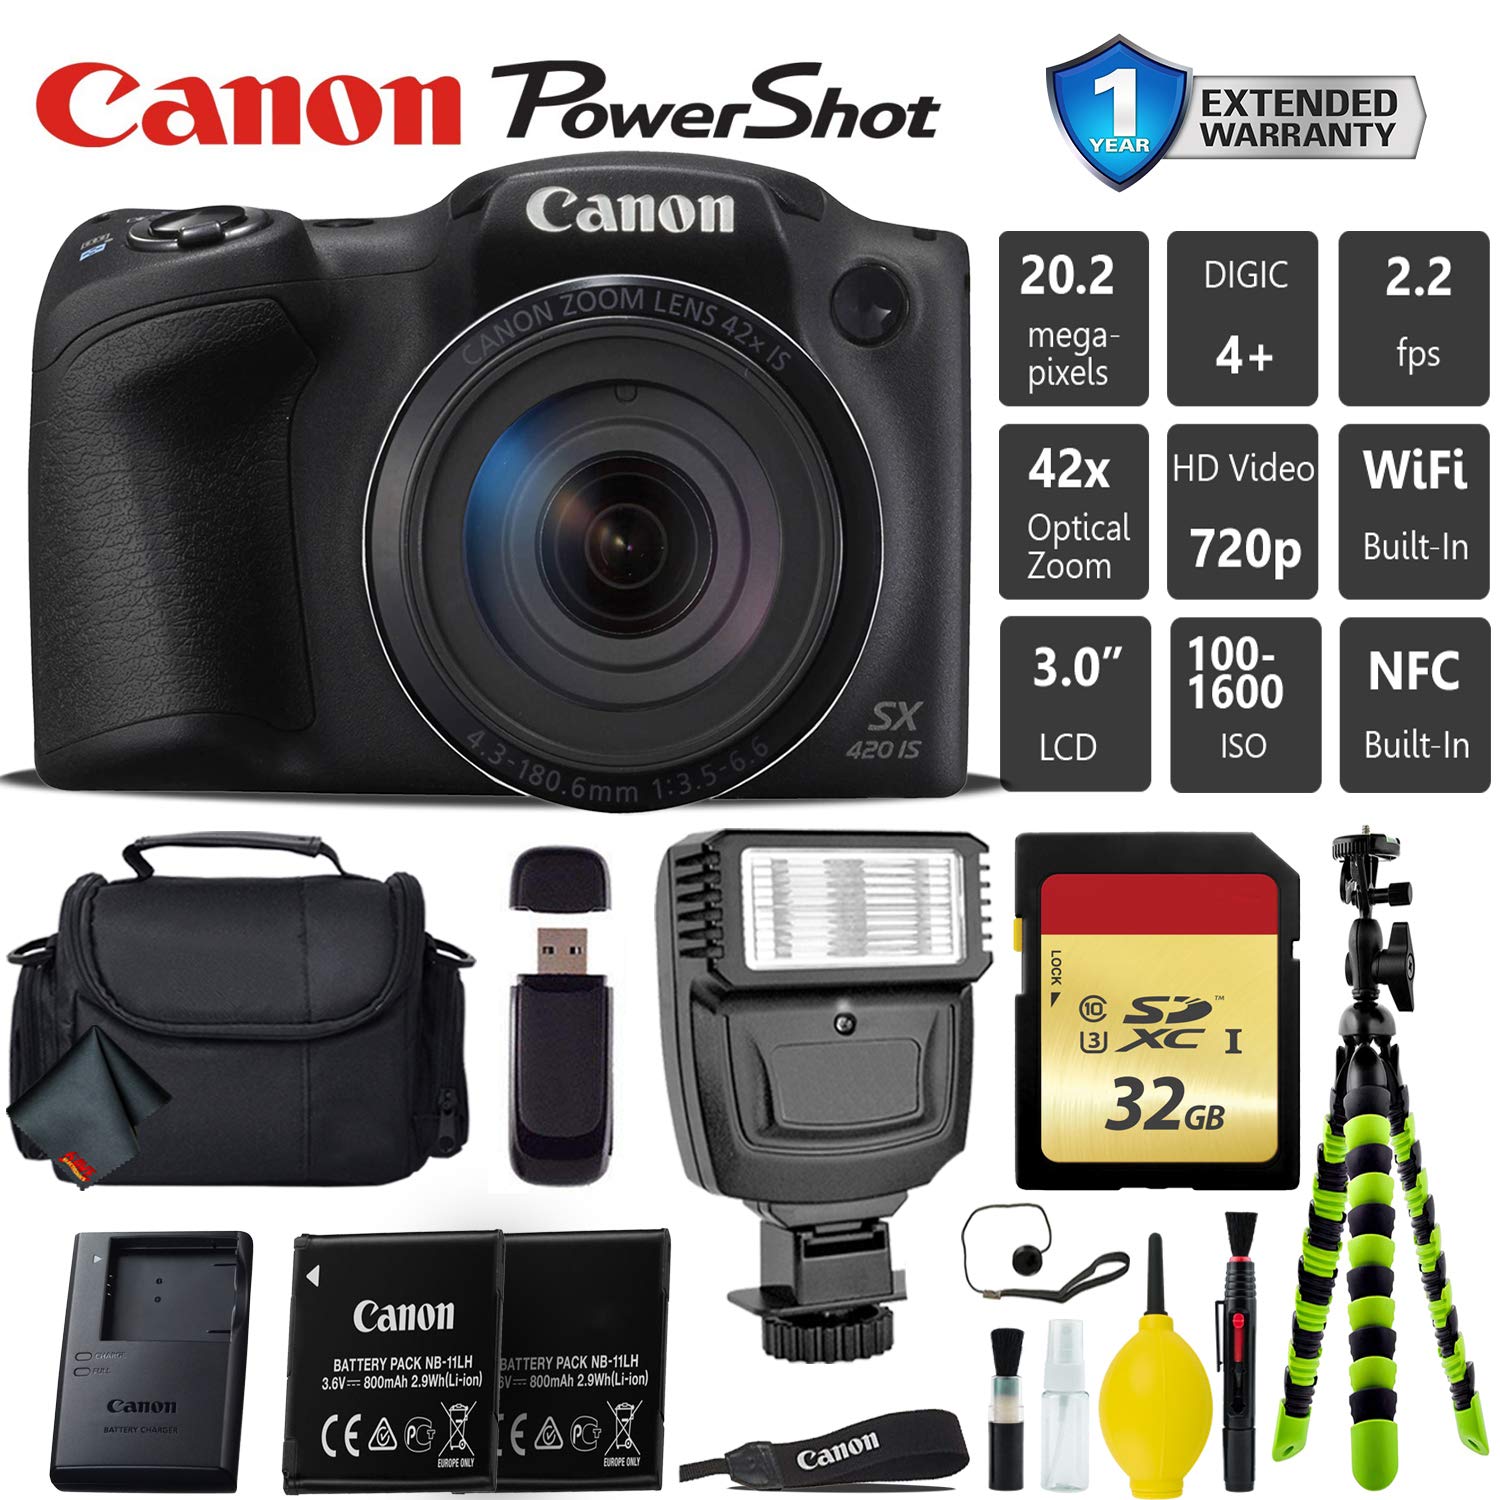 Canon PowerShot SX420 is Digital Point and Shoot Camera + Extra Battery + Digital Flash + Camera Case + 32GB Class 10 Card Starter Bundle